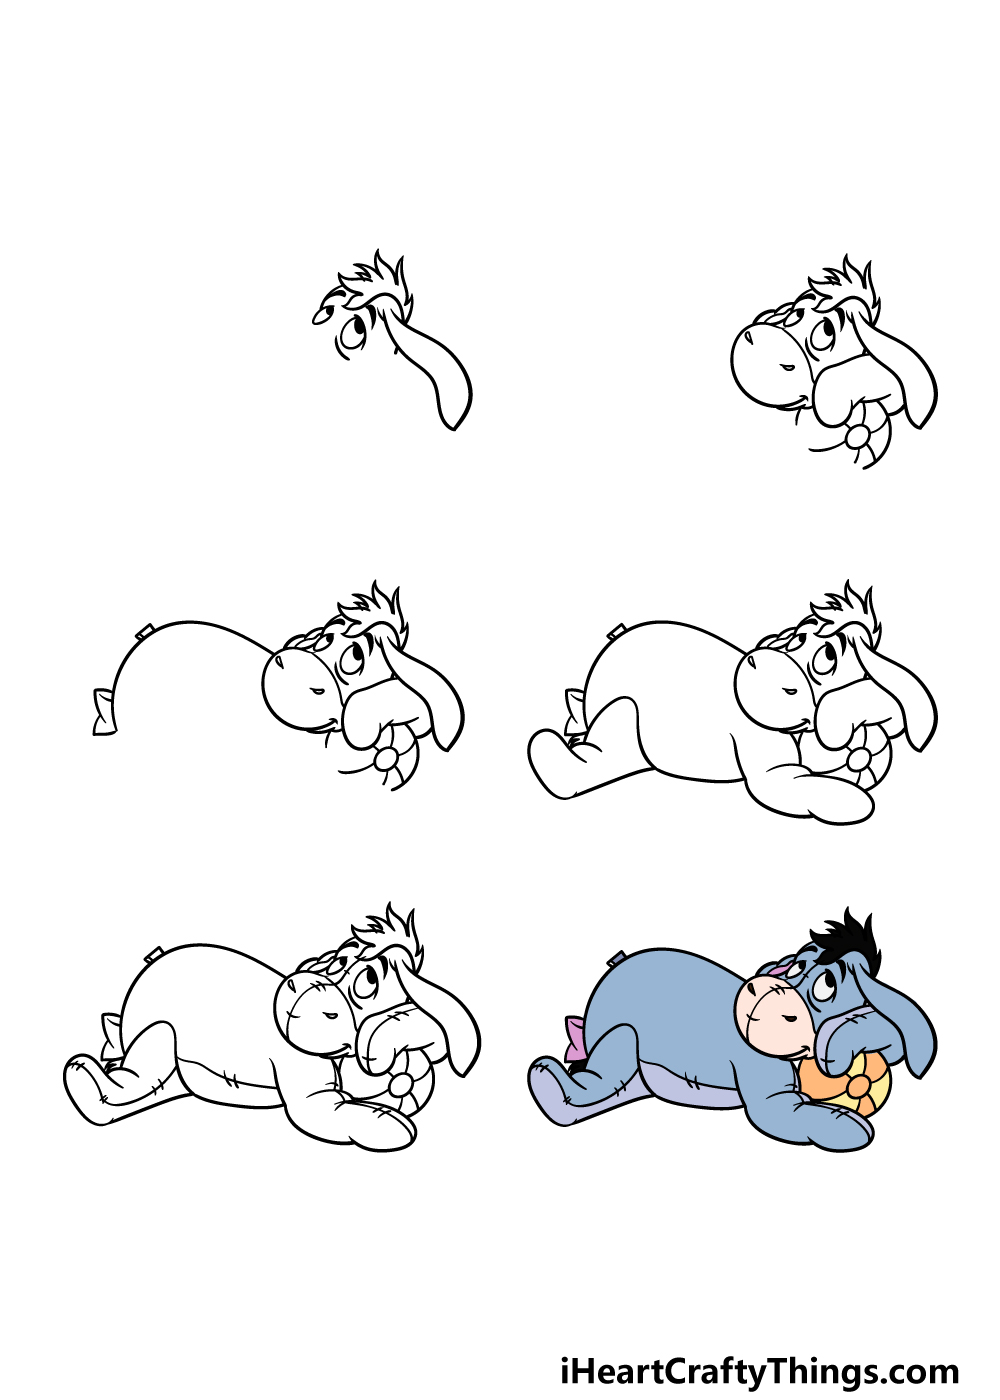 How to Draw Eeyore in 6 steps